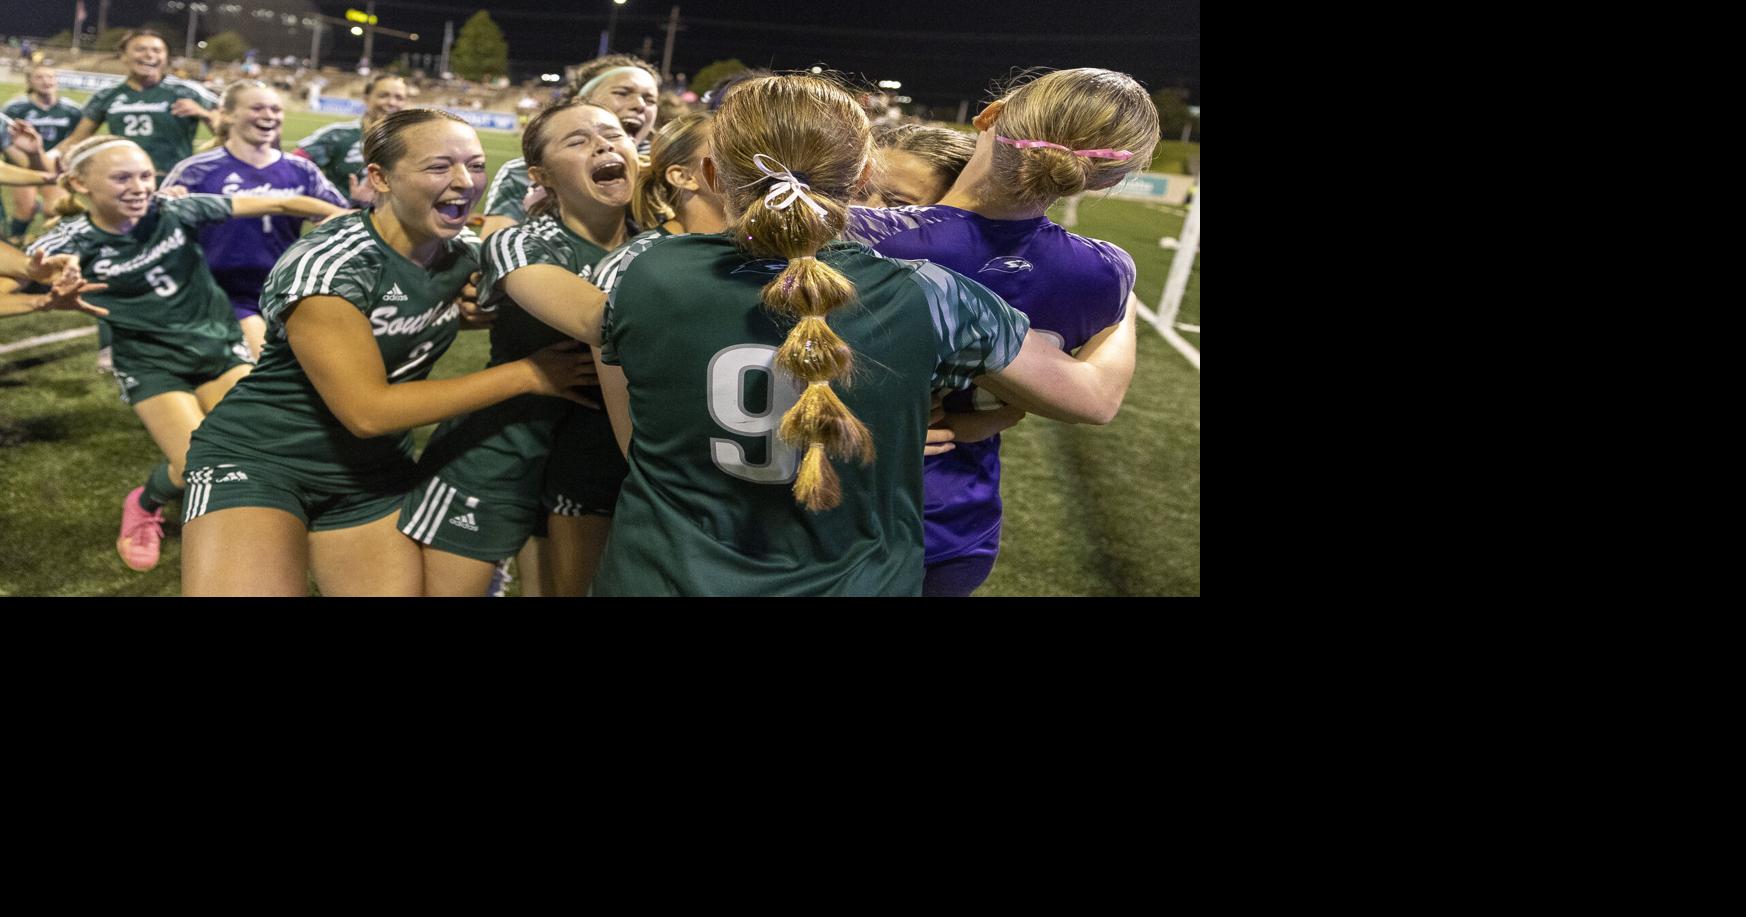 Watch: Lincoln Southwest makes long free kick to force overtime in Class A title game